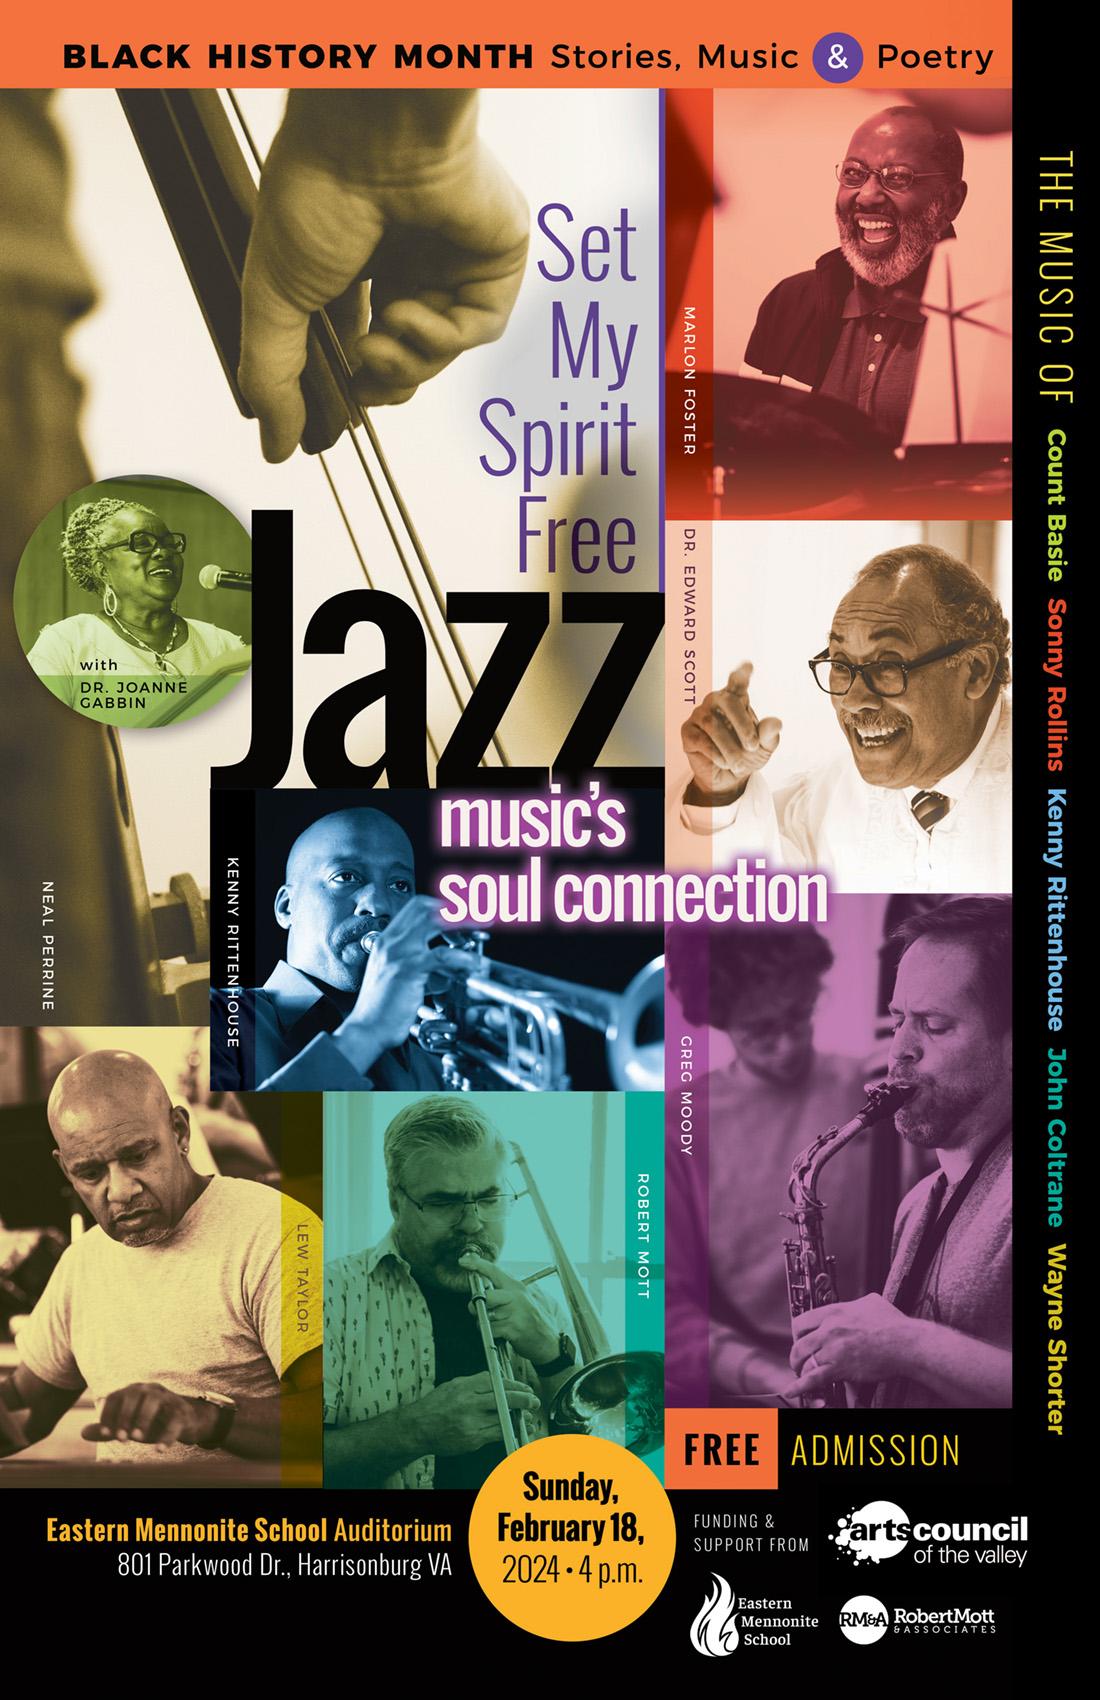 A black History Month event of music, stories and poetry: Set My Spirit Free - Jazz Music's soul connection